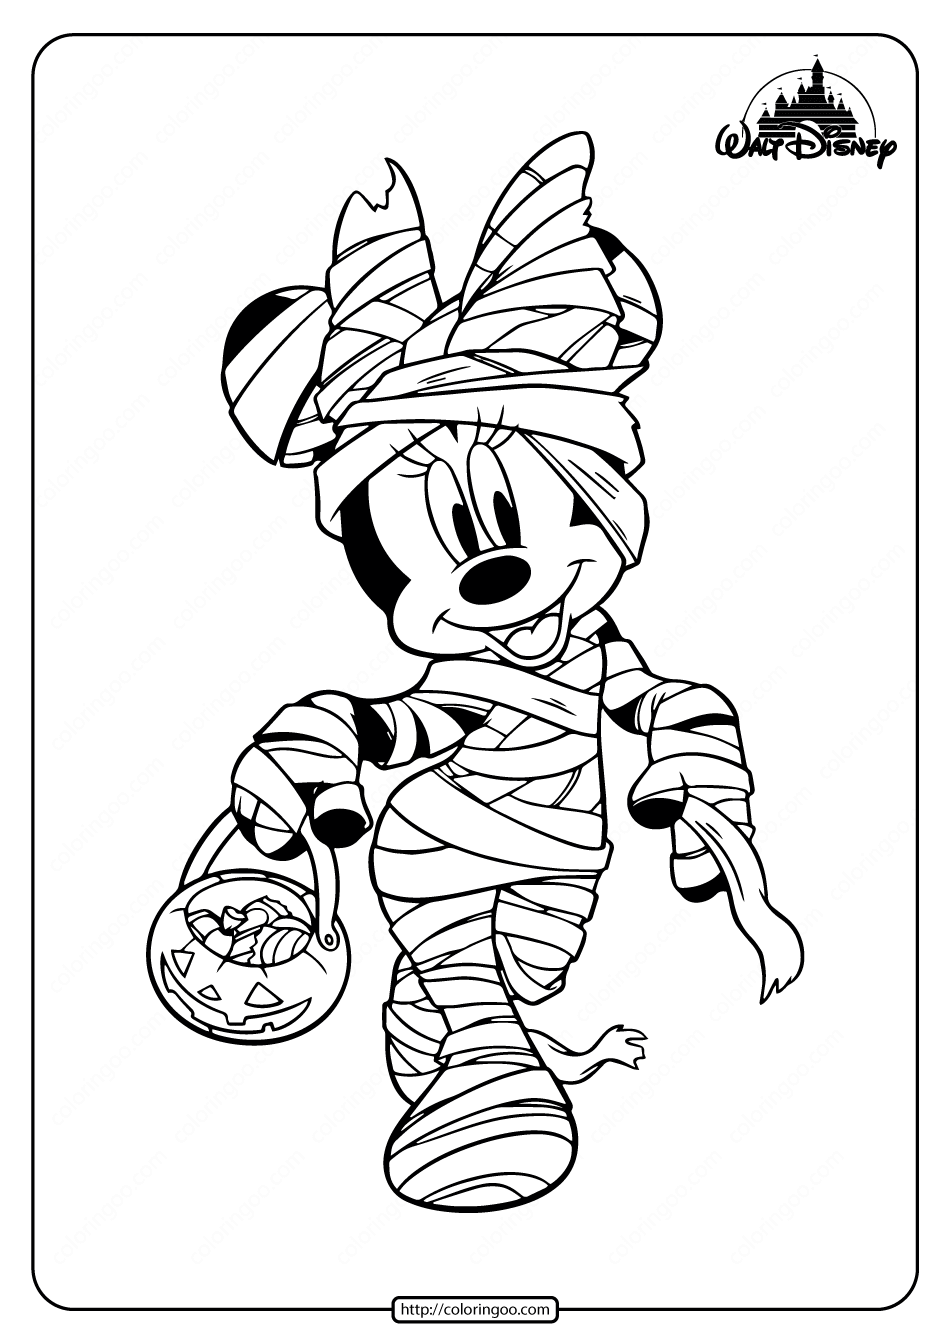 printable minnie mouse halloween coloring pages